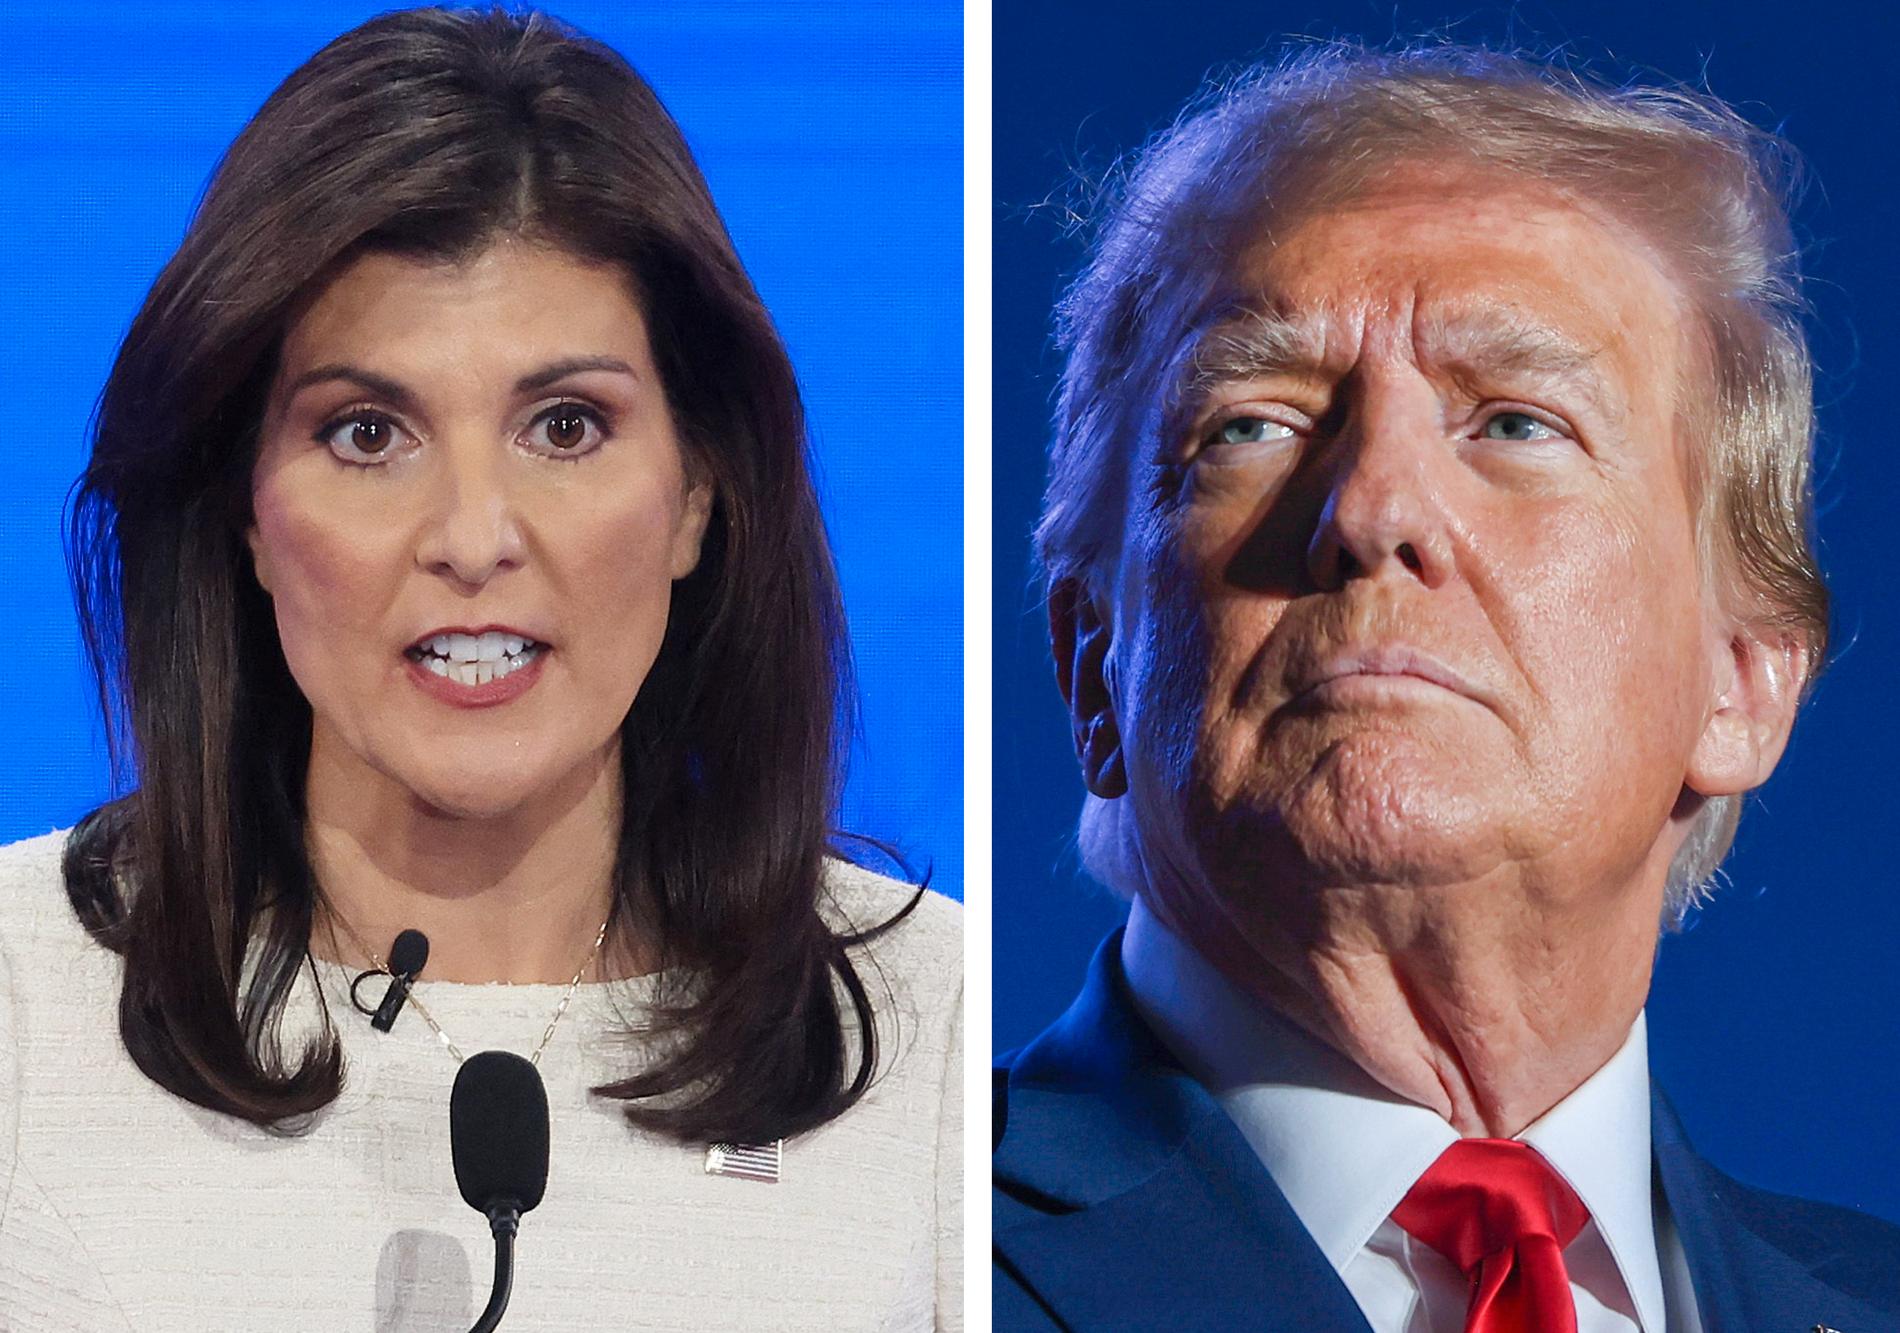 Nikki Haley criticizes Donald Trump and questions if he is too old